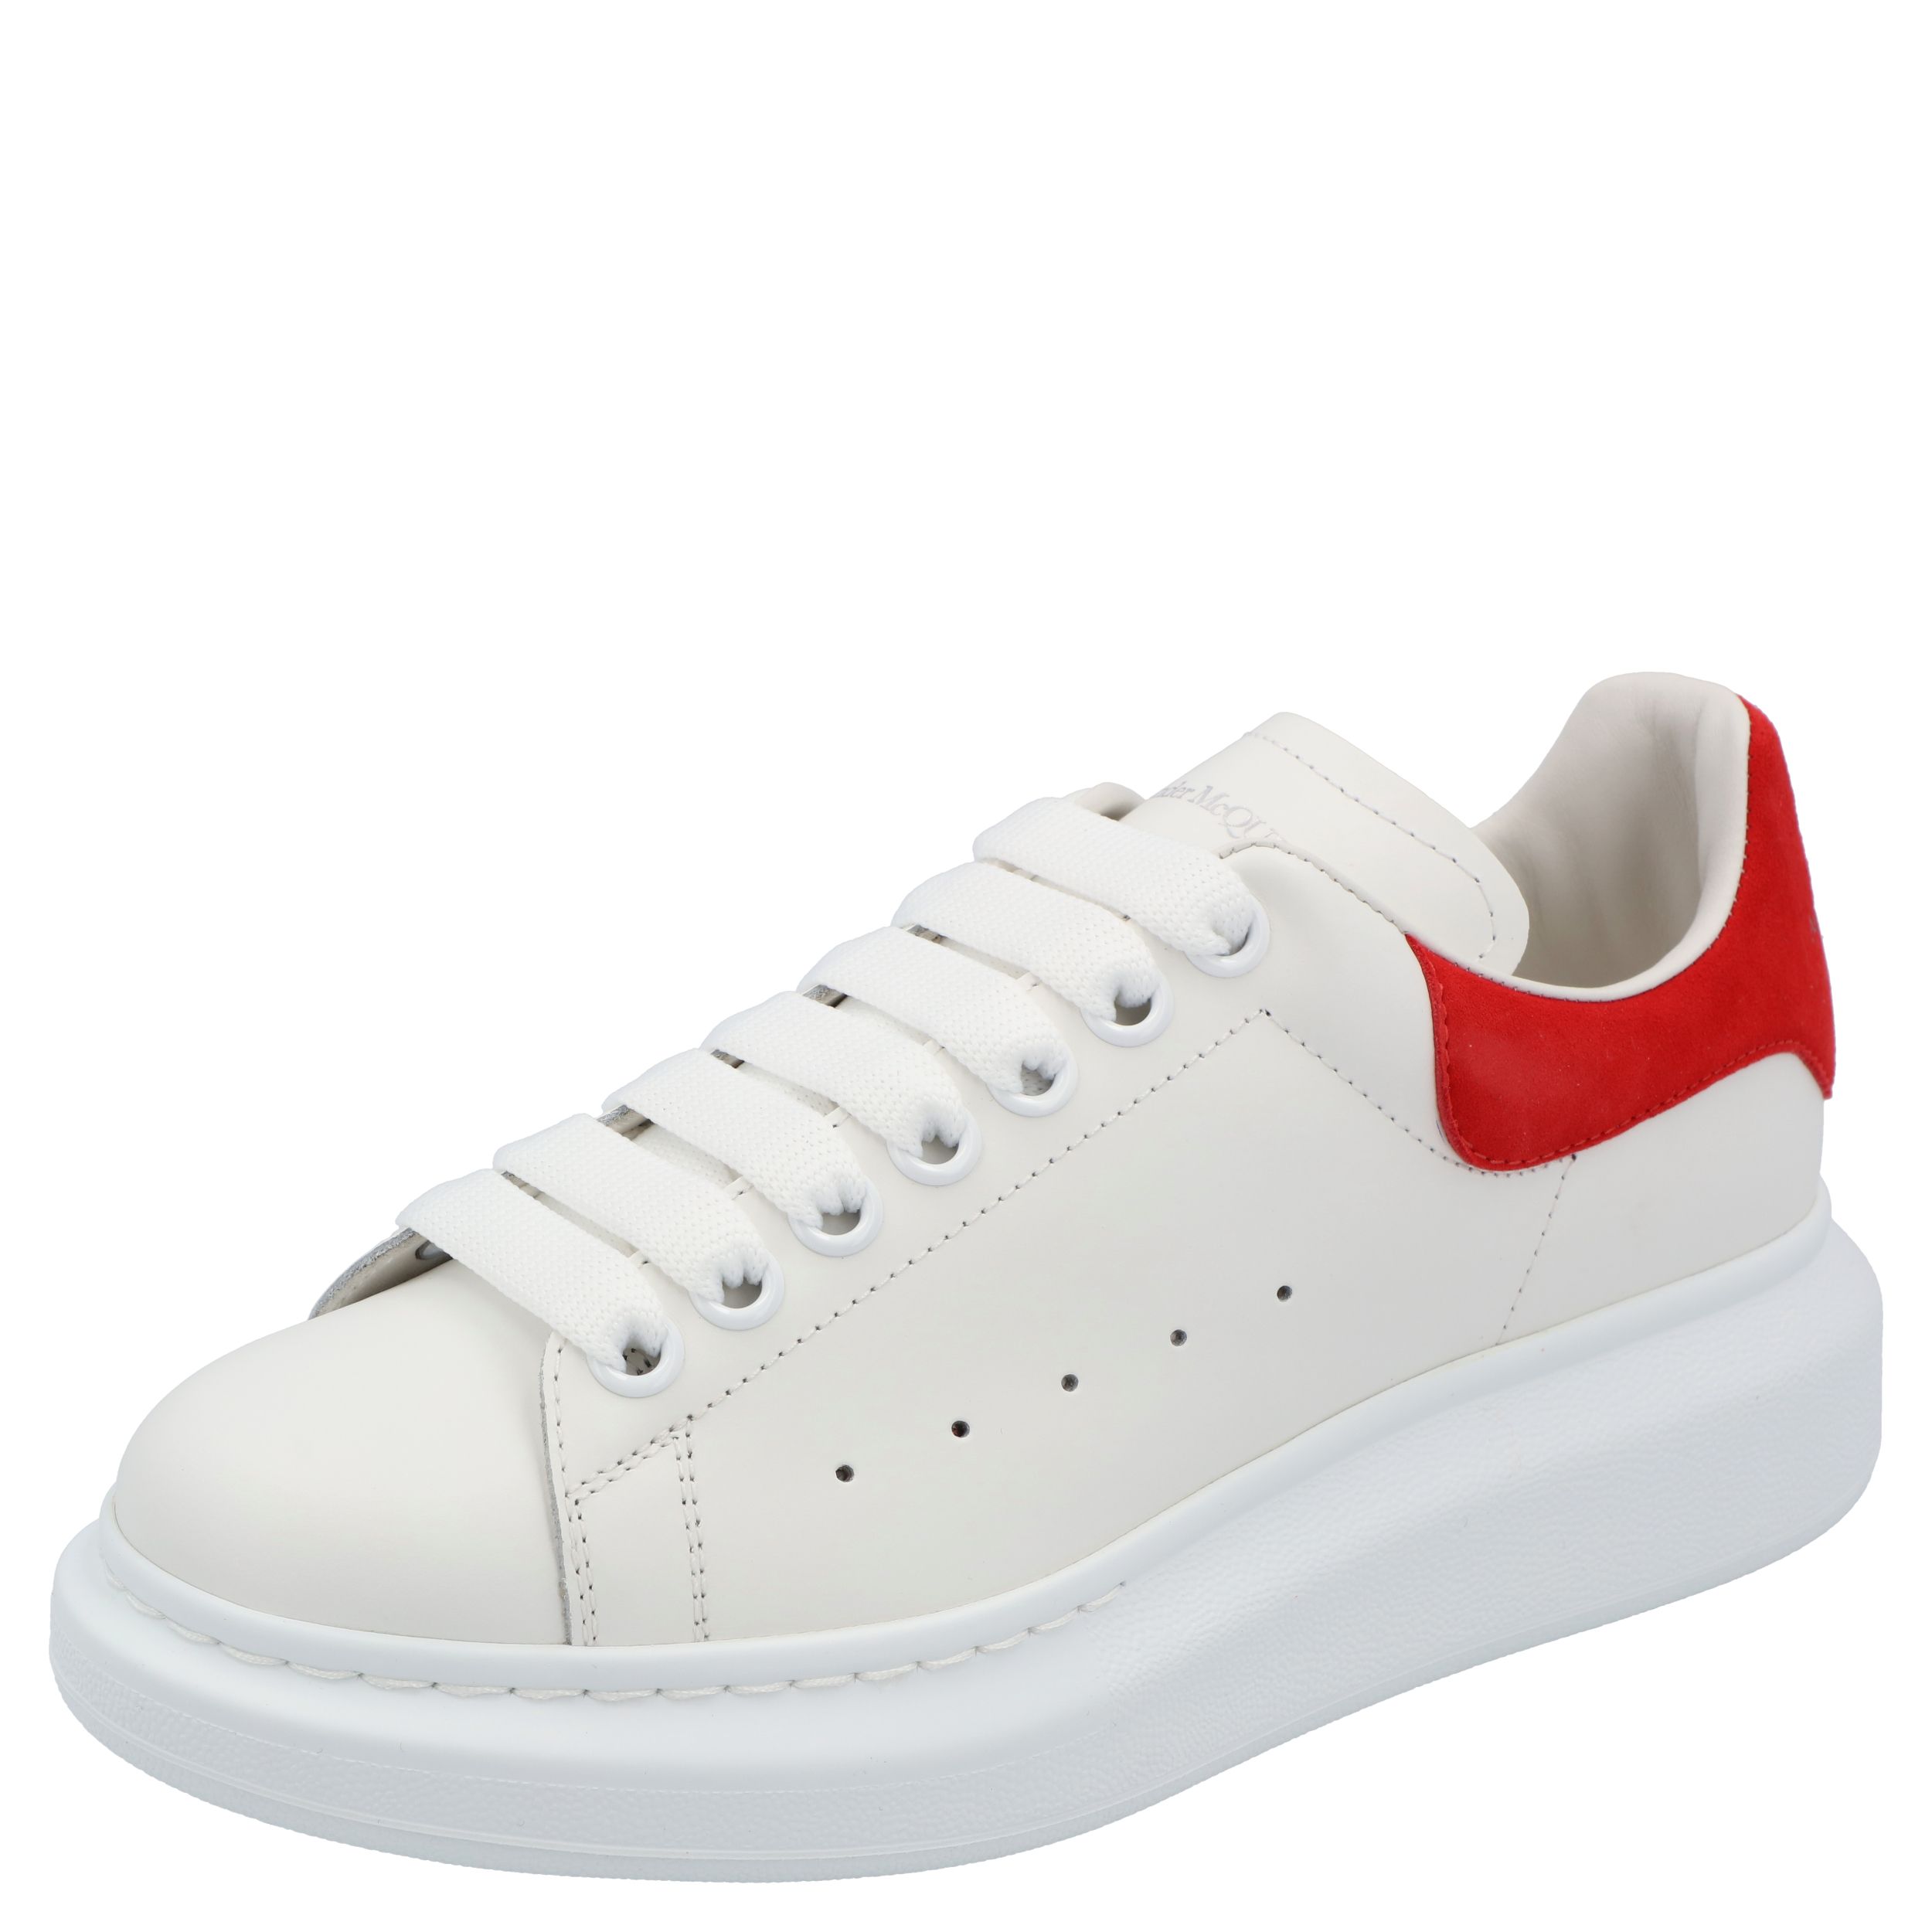 Pre-owned Alexander Mcqueen White Leather Oversized Sneakers Size Eu 36